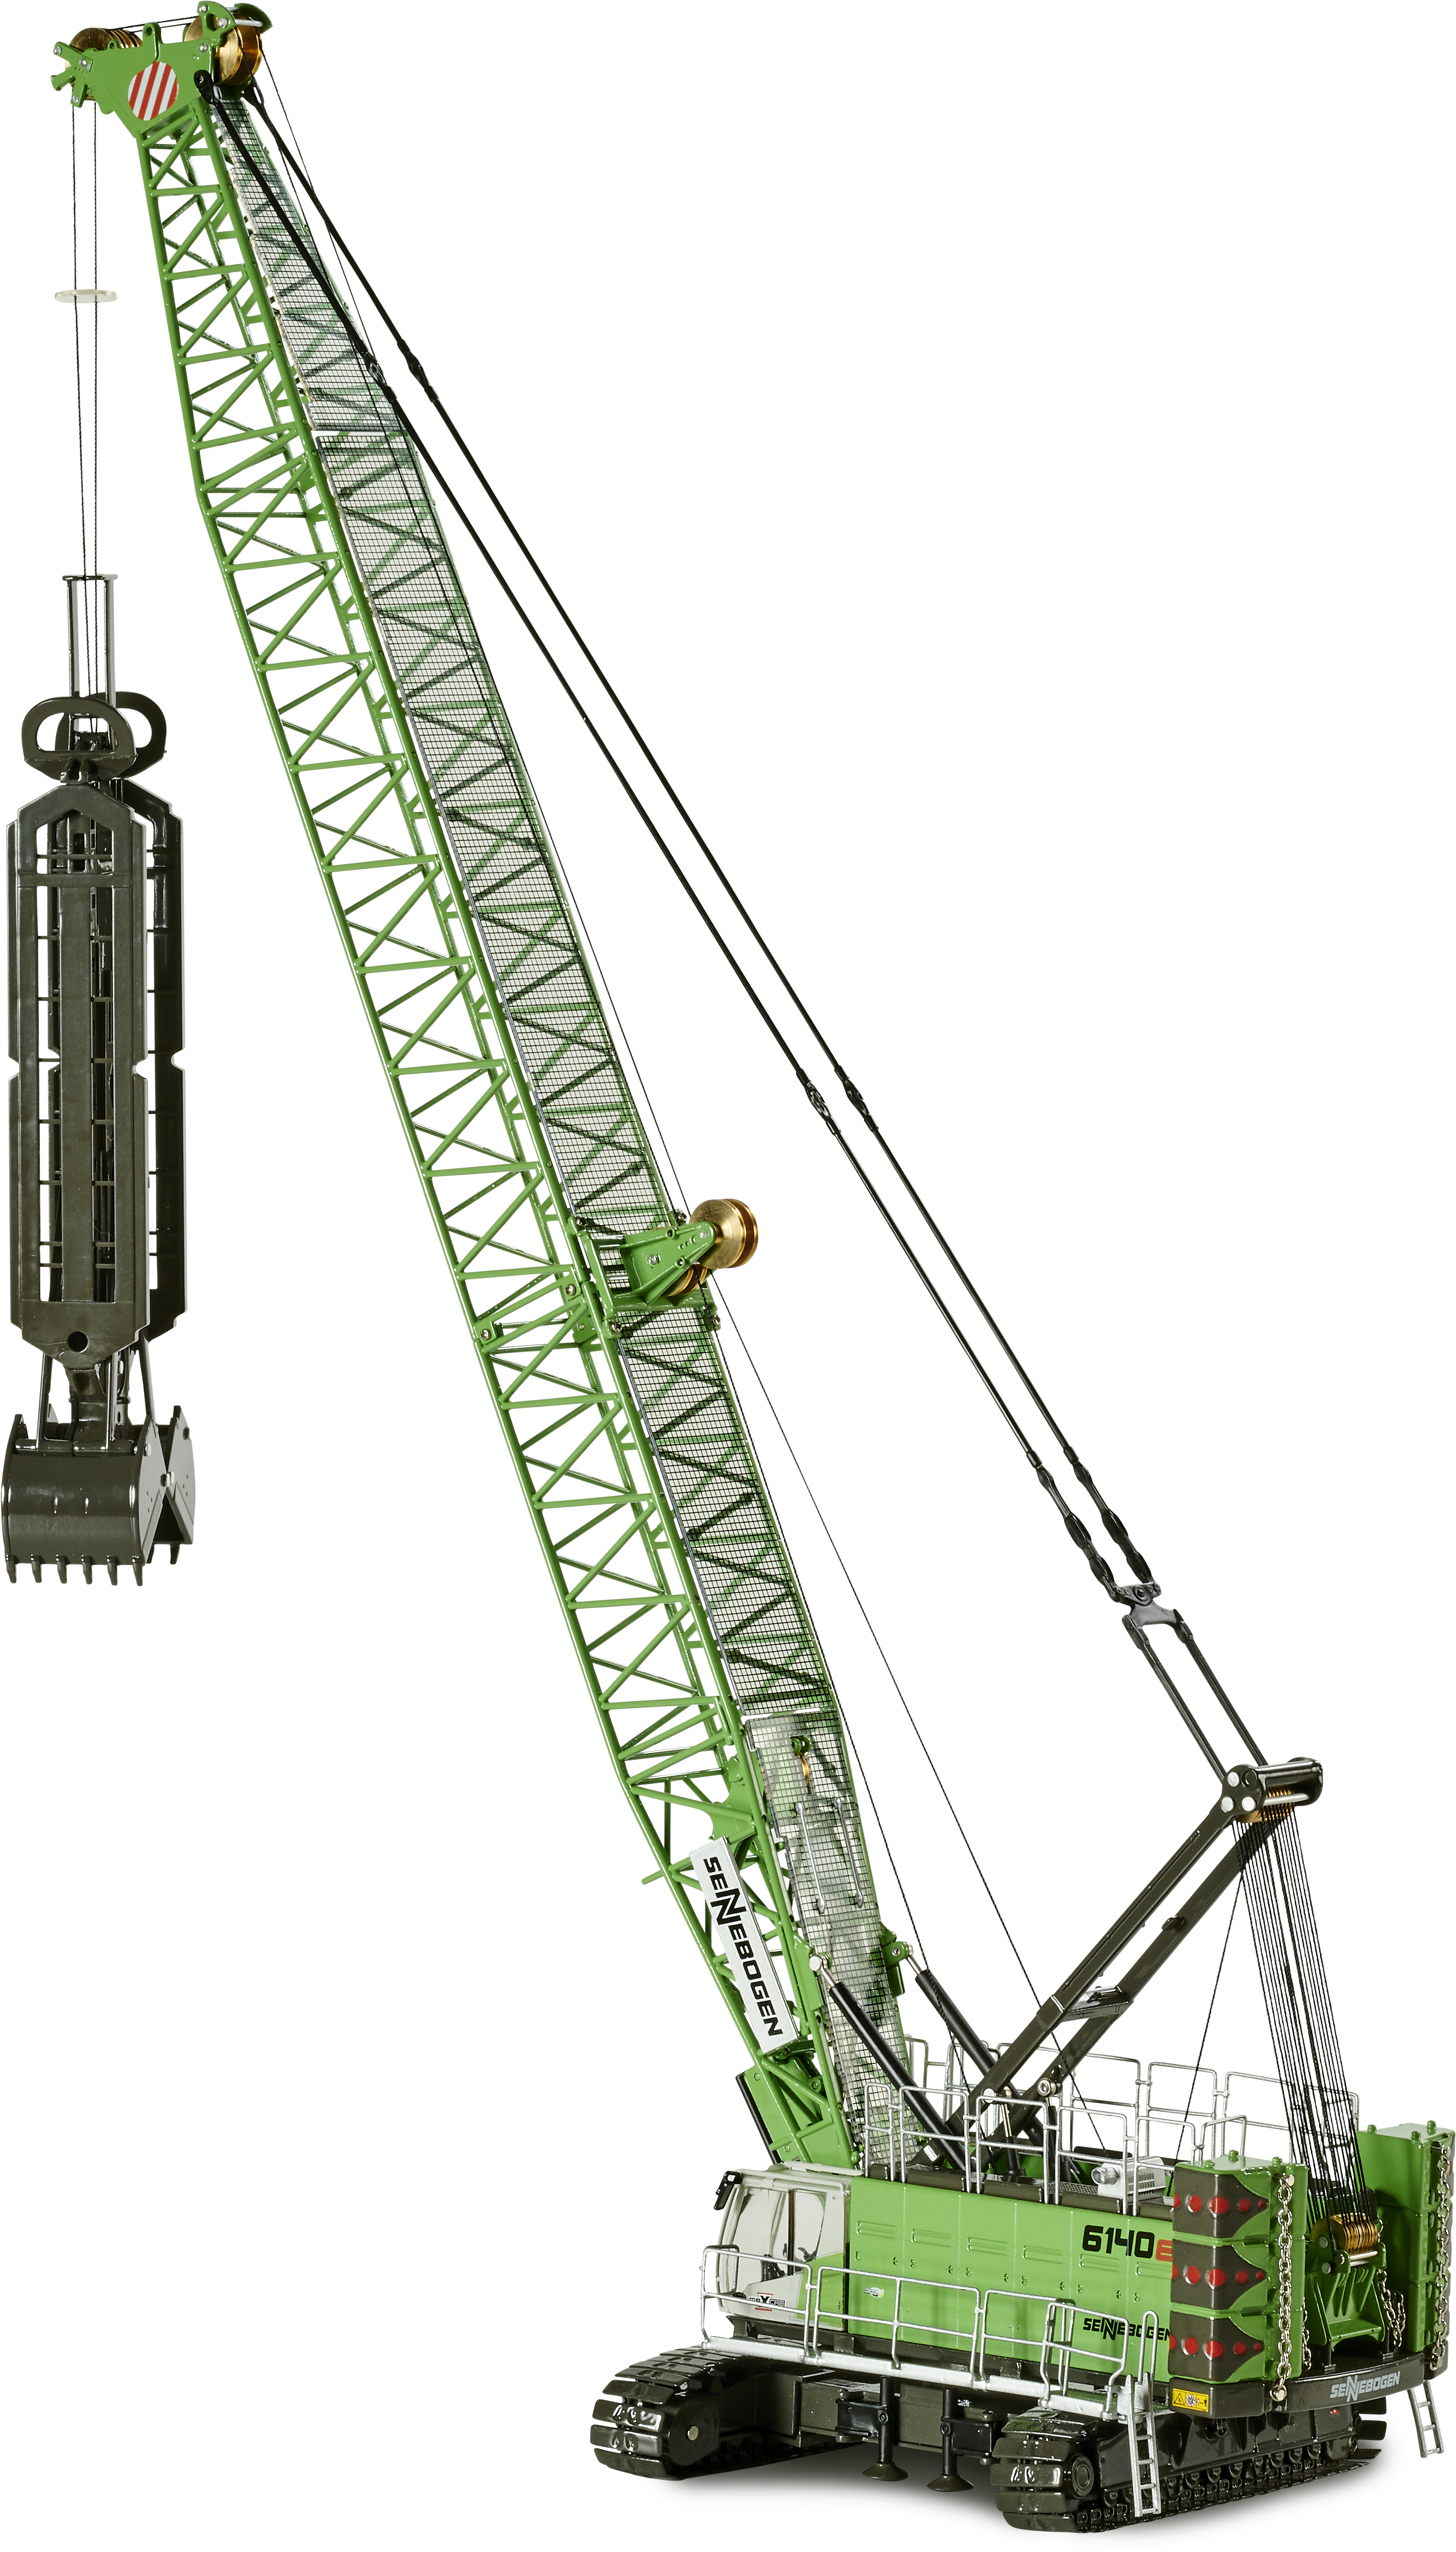 Product Image - ROS 299242 SENNEBOGEN Heavy Duty Crawler Crane 6140 HD with Diaphragm Wall Grab  - Scale 1:50